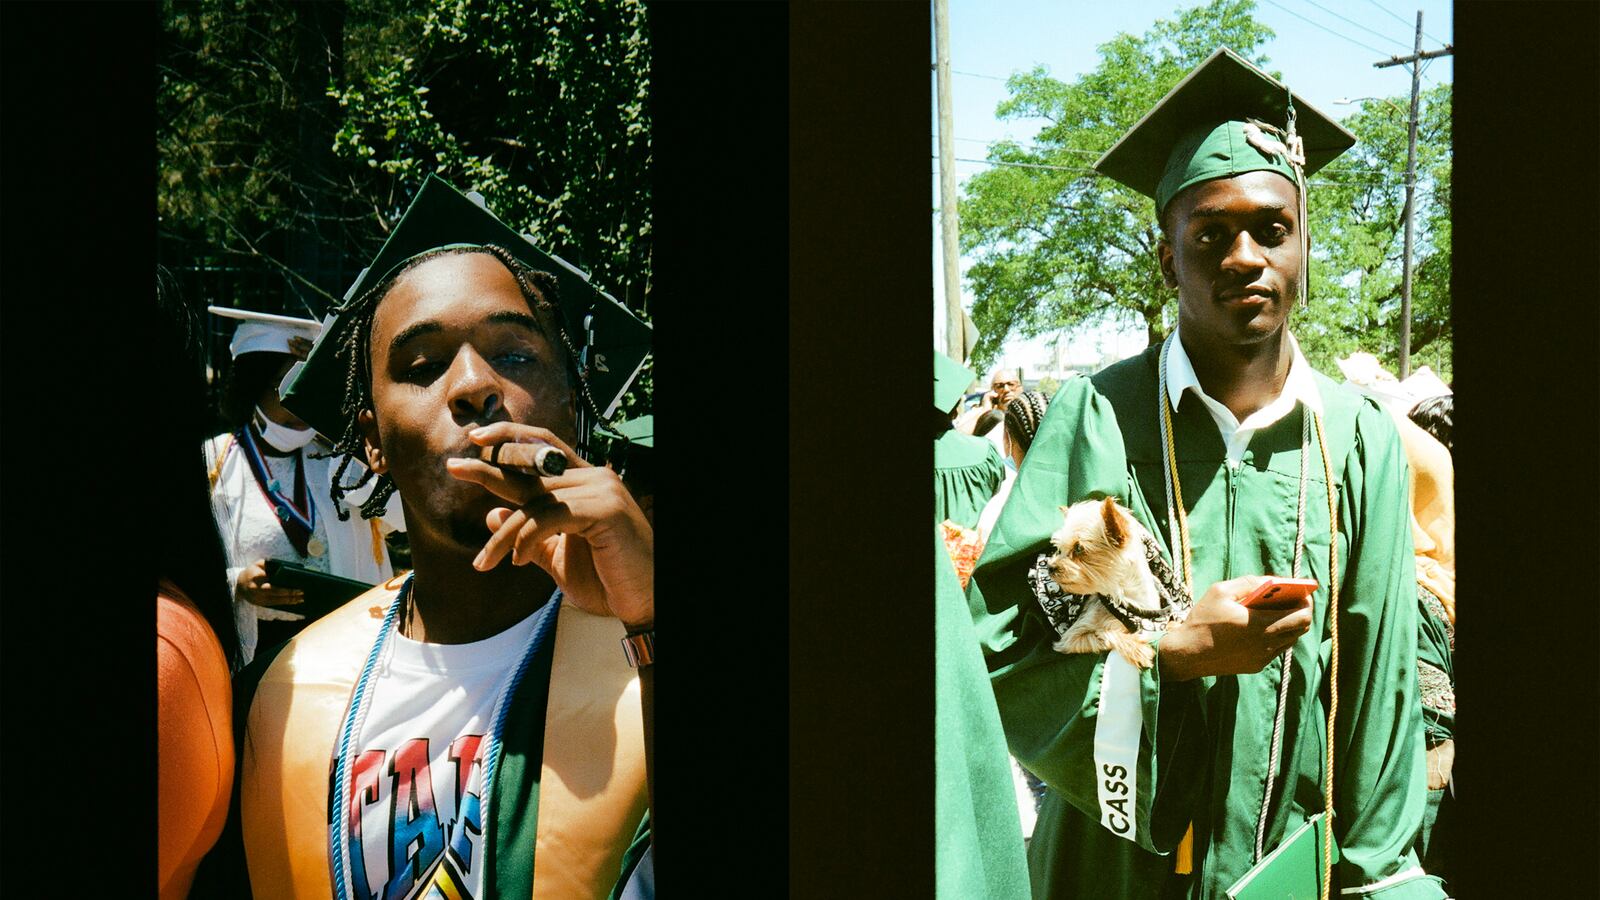 (Left) A young man in green graduation regalia takes a puff of a cigar. (Right) A young man in green graduation regalia holds his recently received diploma in one hand and a small Yorkshire terrier in the other.